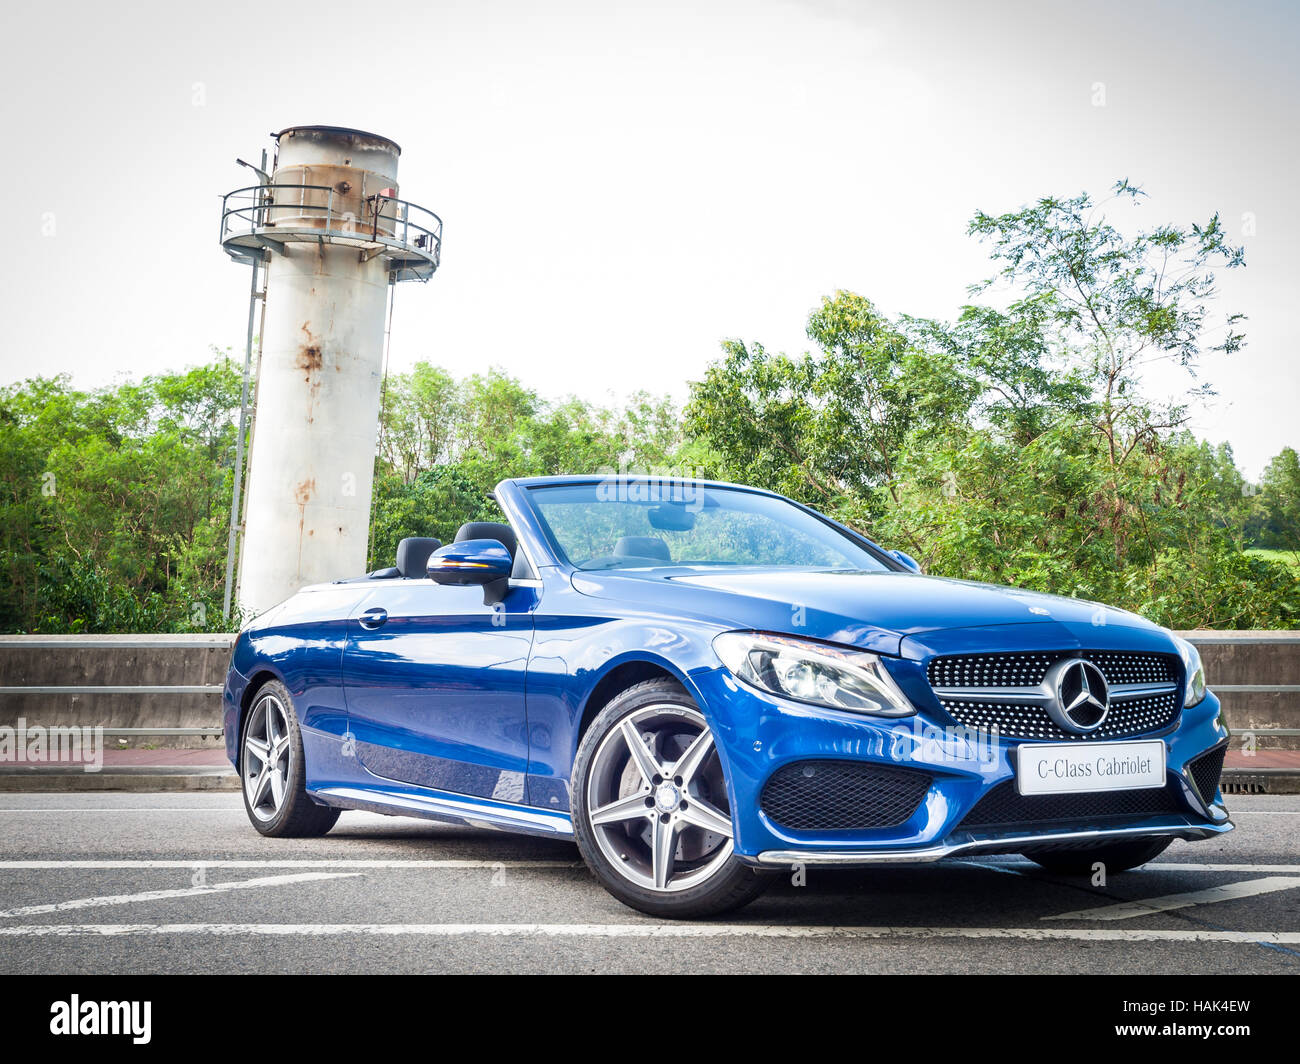 Mercedes C200 High Resolution Stock Photography and Images - Alamy